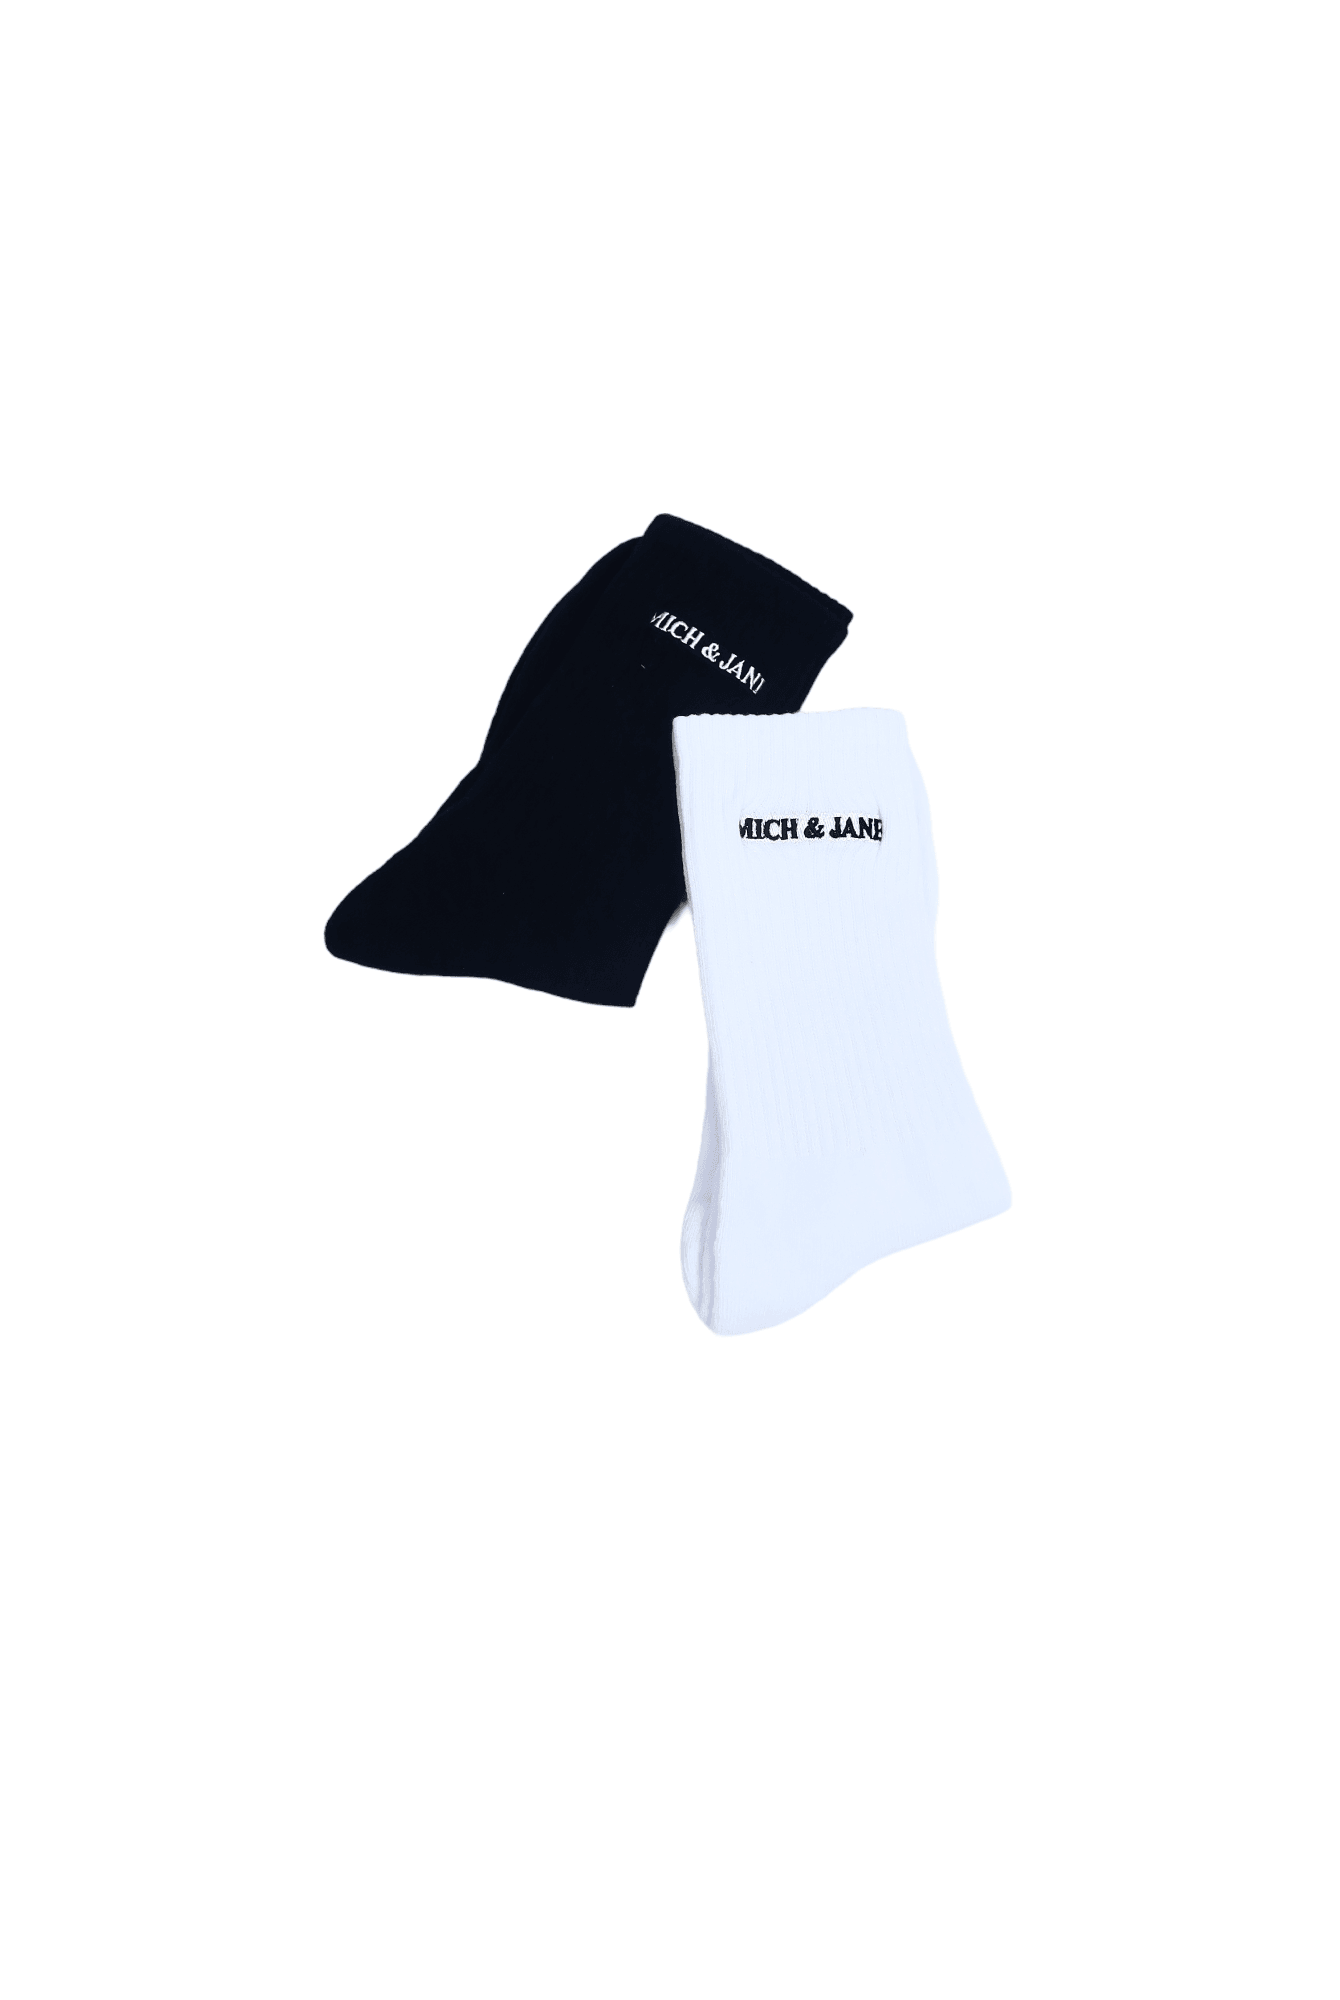 EMBROIDERED SOCKS 2PACK - MICH & JANE